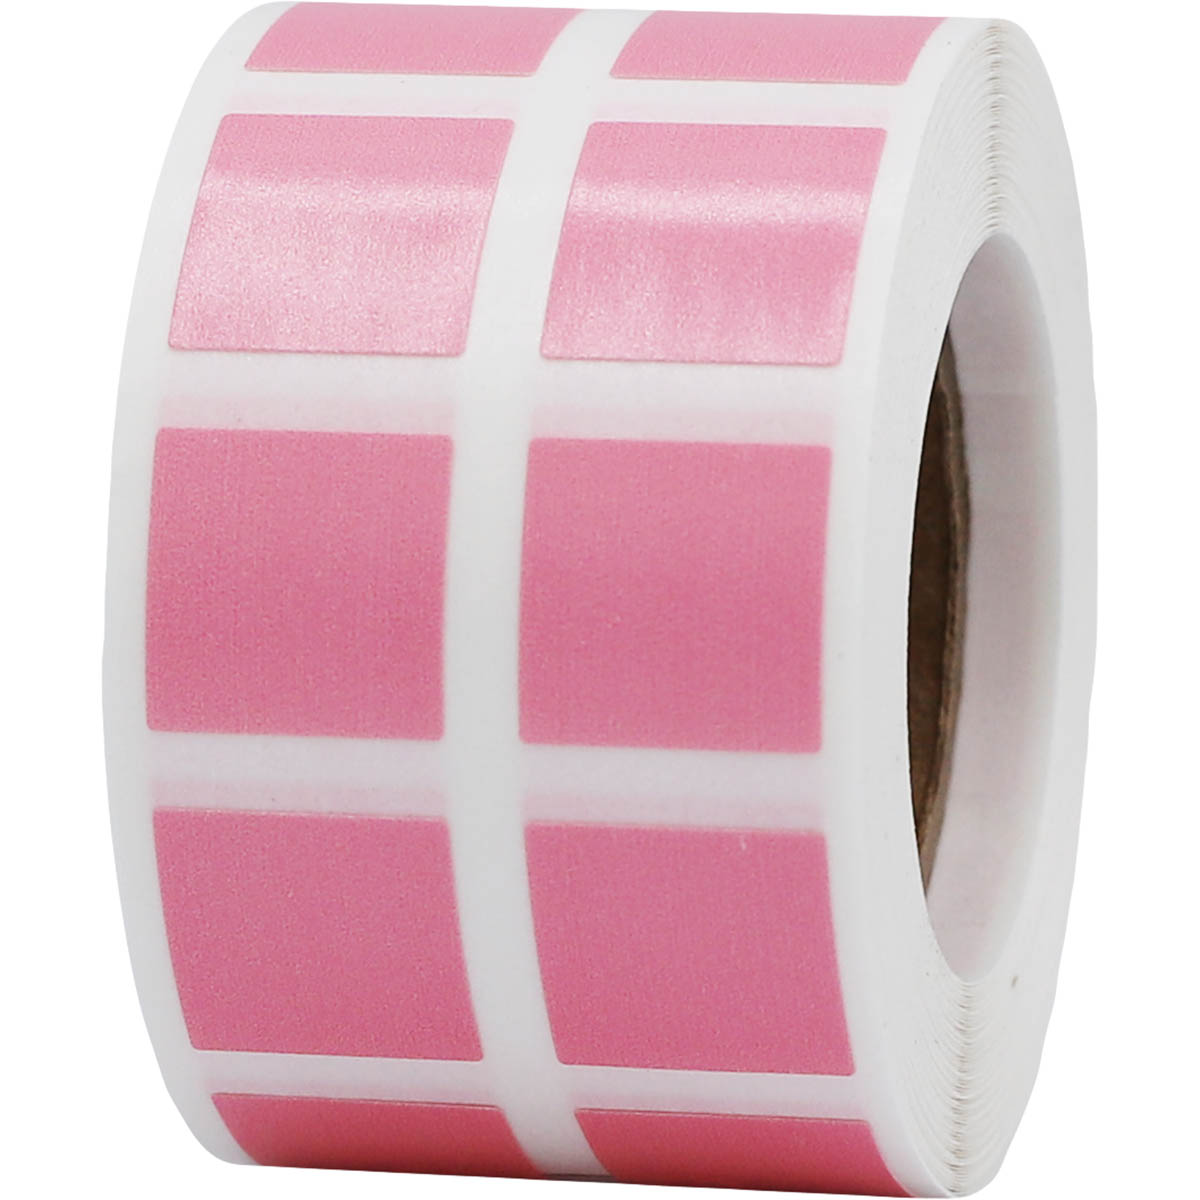 Small Pink Colored Square Stickers 1/2